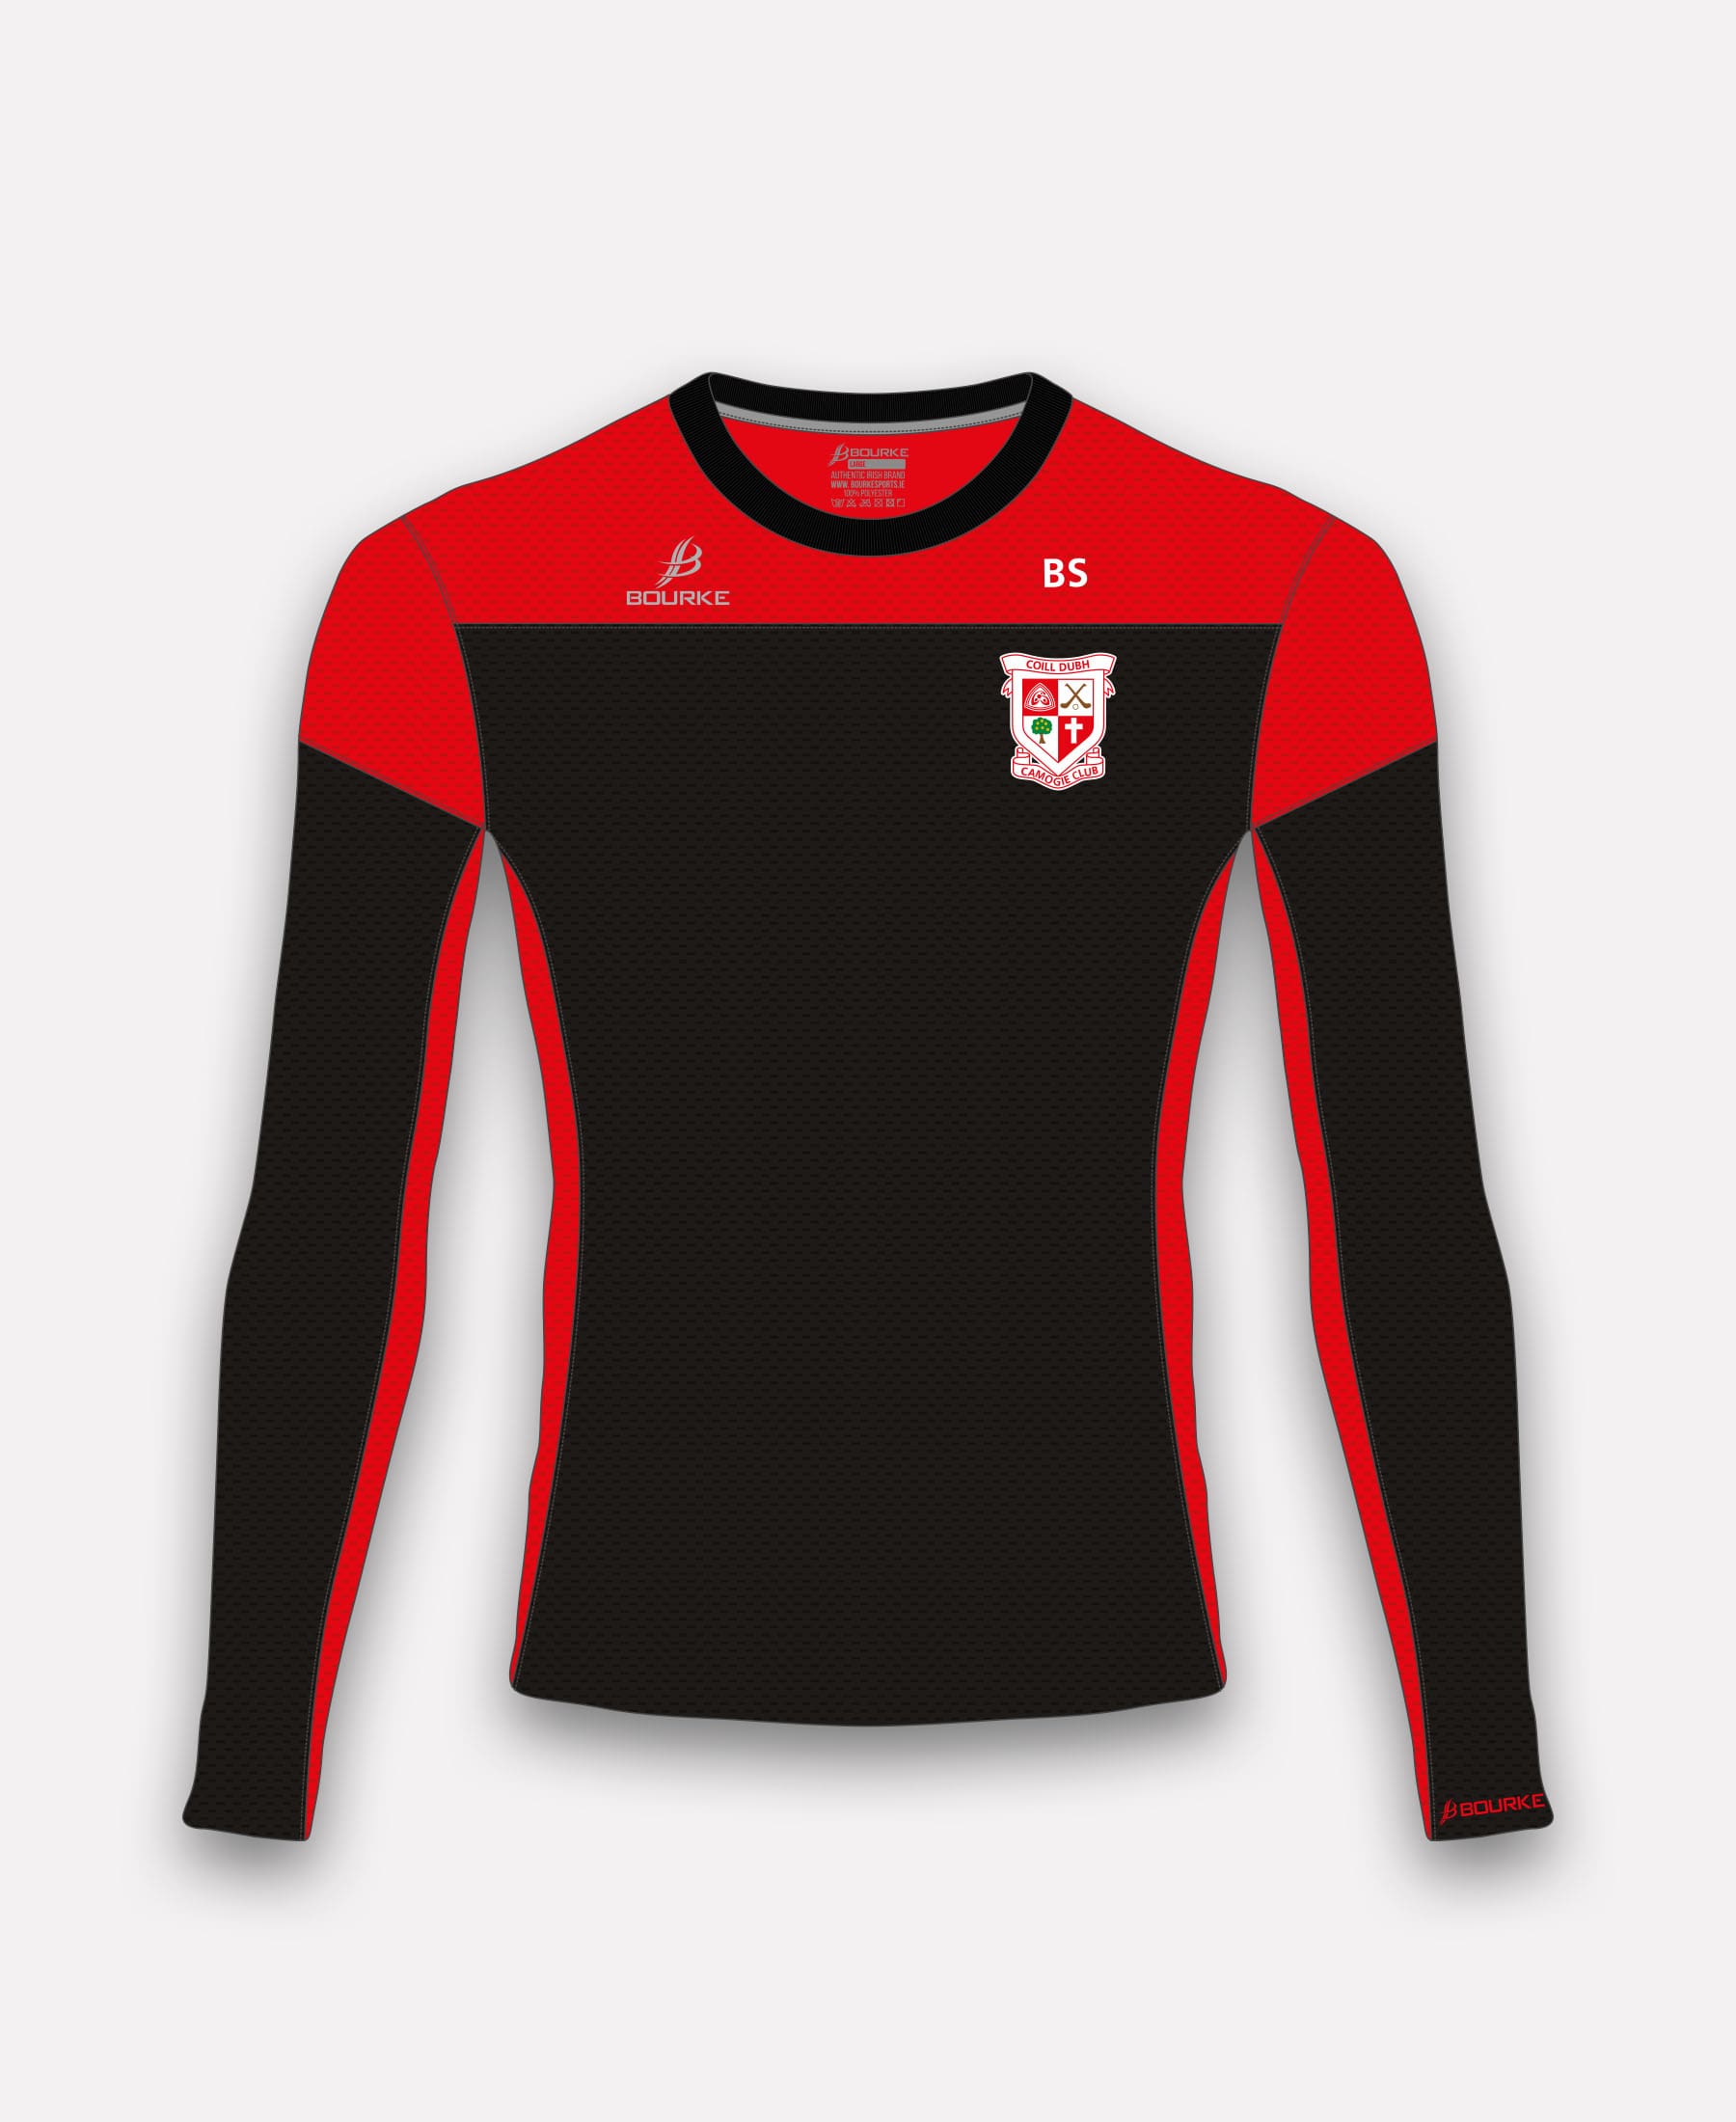 Coill Dubh Camogie TACA Crew Neck (Red/Black)